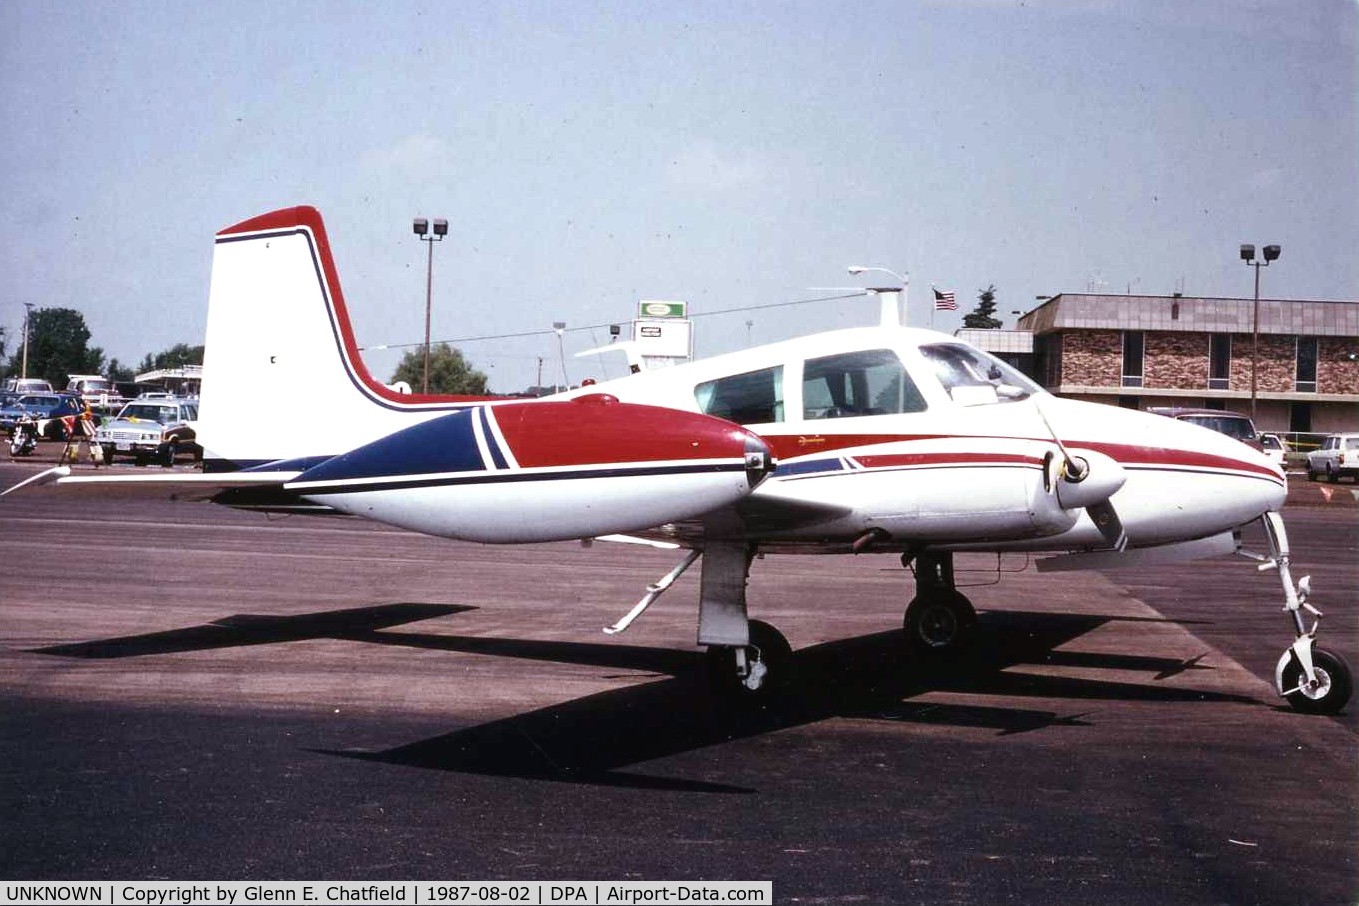 UNKNOWN, , Photo taken for aircraft recognition training.   Cessna 310B passing through.  Nice paint job.